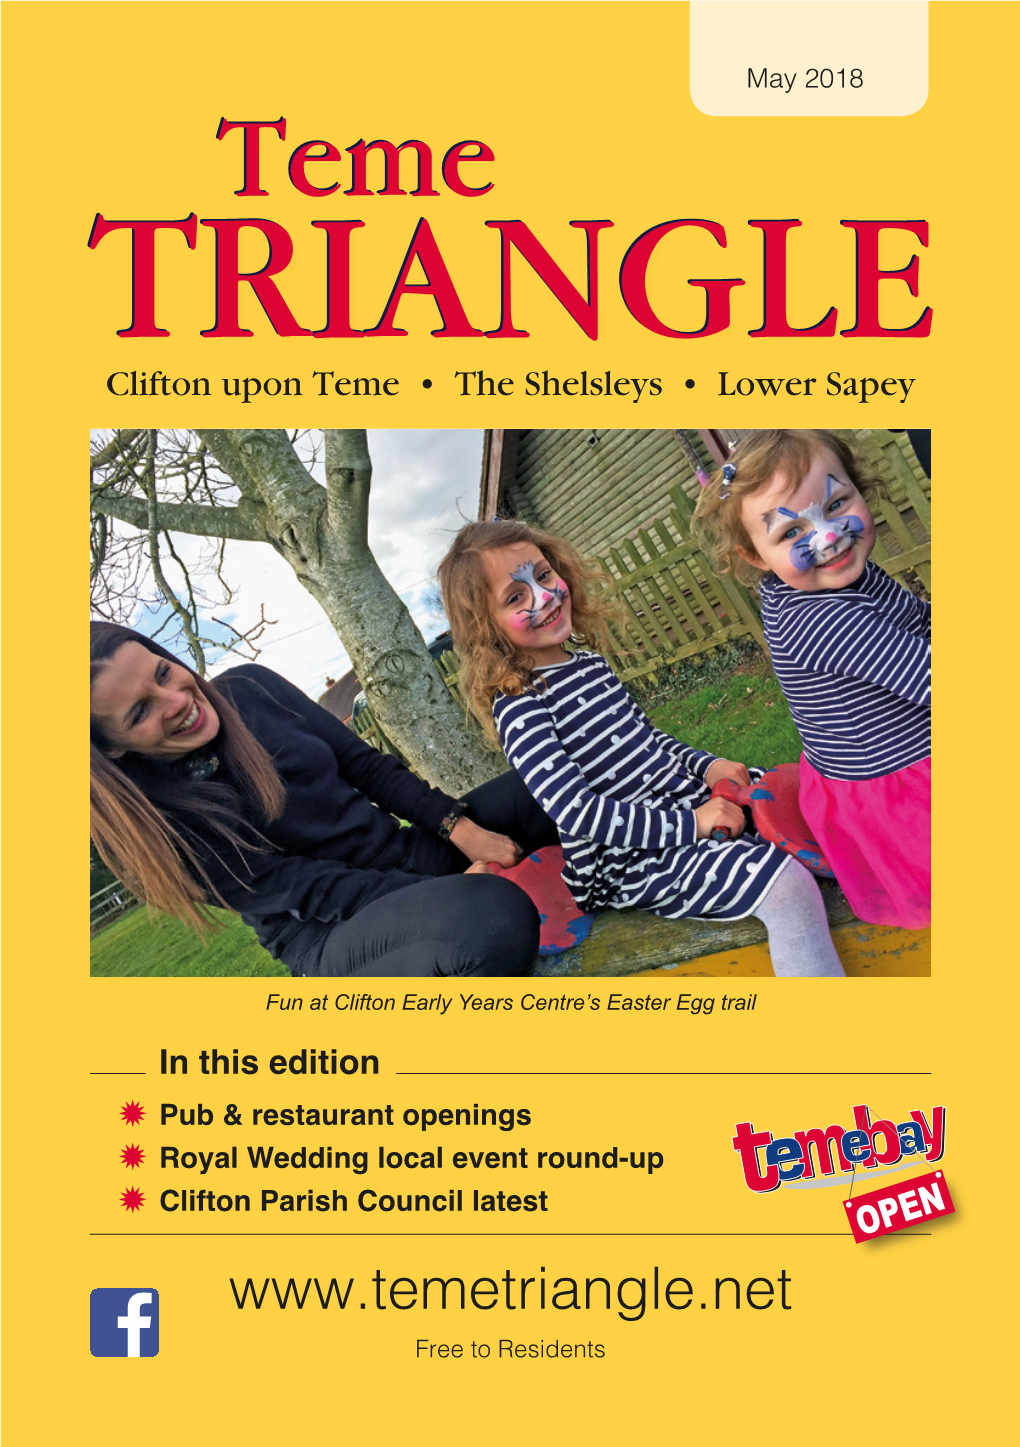 May 2018 Temeteme TRIANGLETRIANGLE Clifton Upon Teme • the Shelsleys • Lower Sapey